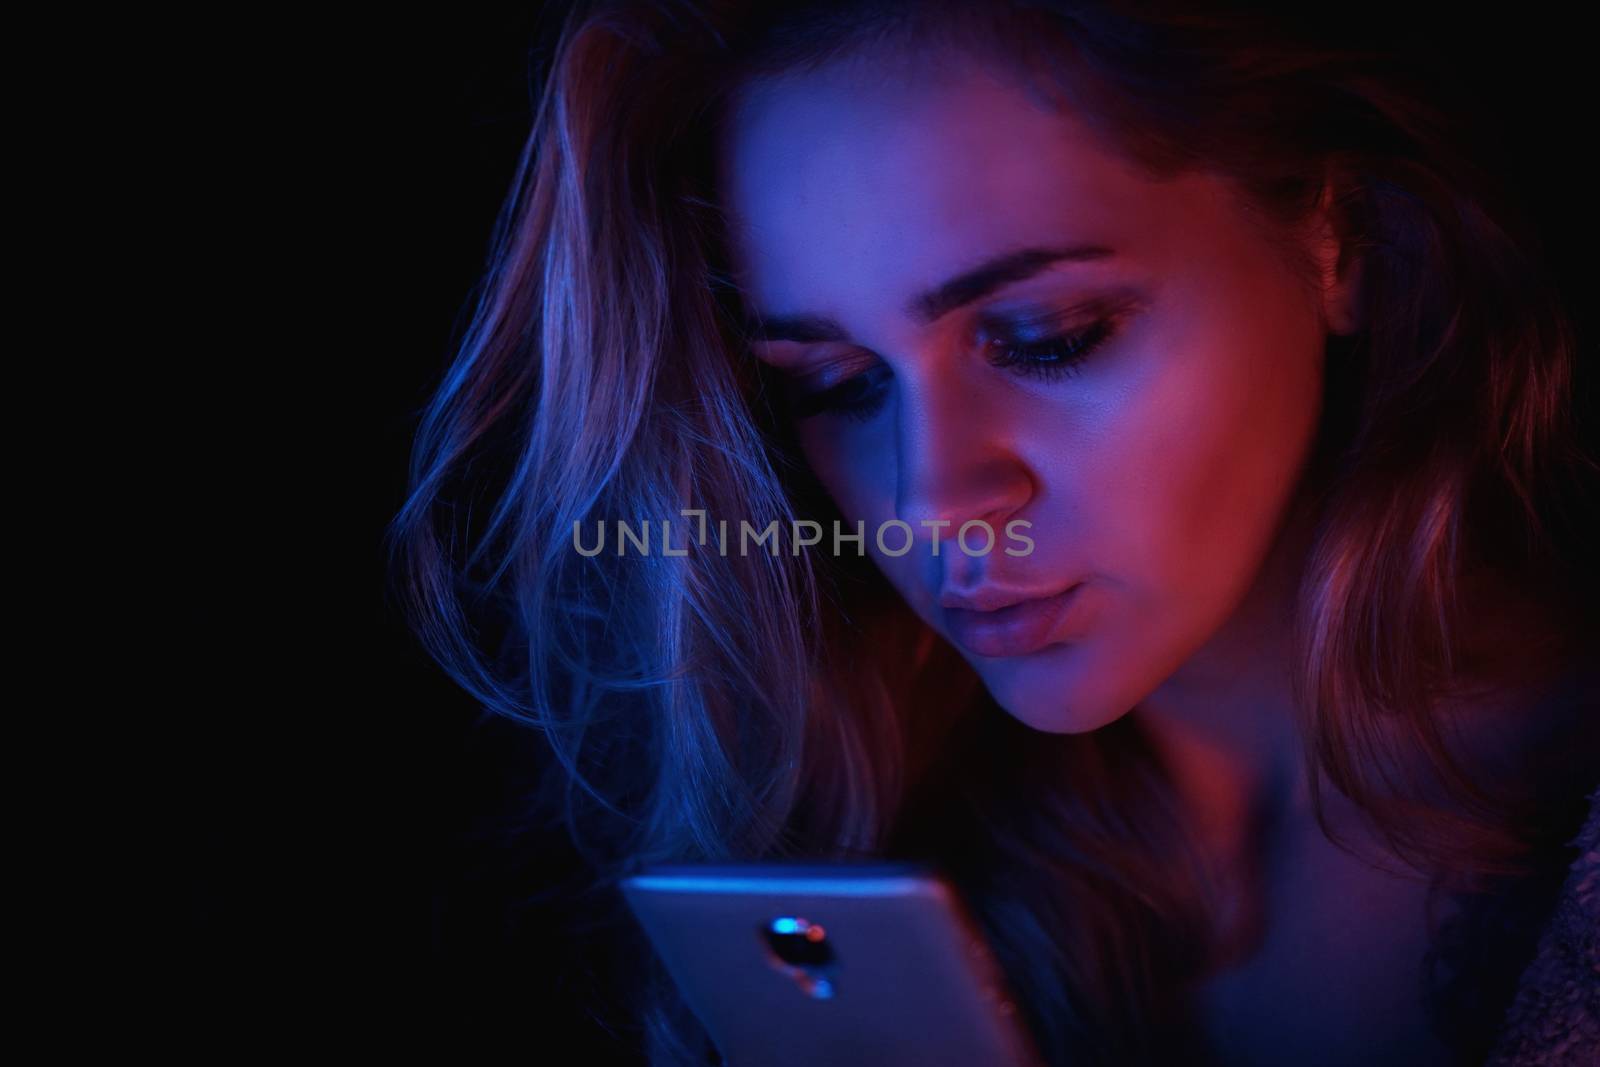 Girl using cellphone at night with neon light - pink and blue by natali_brill